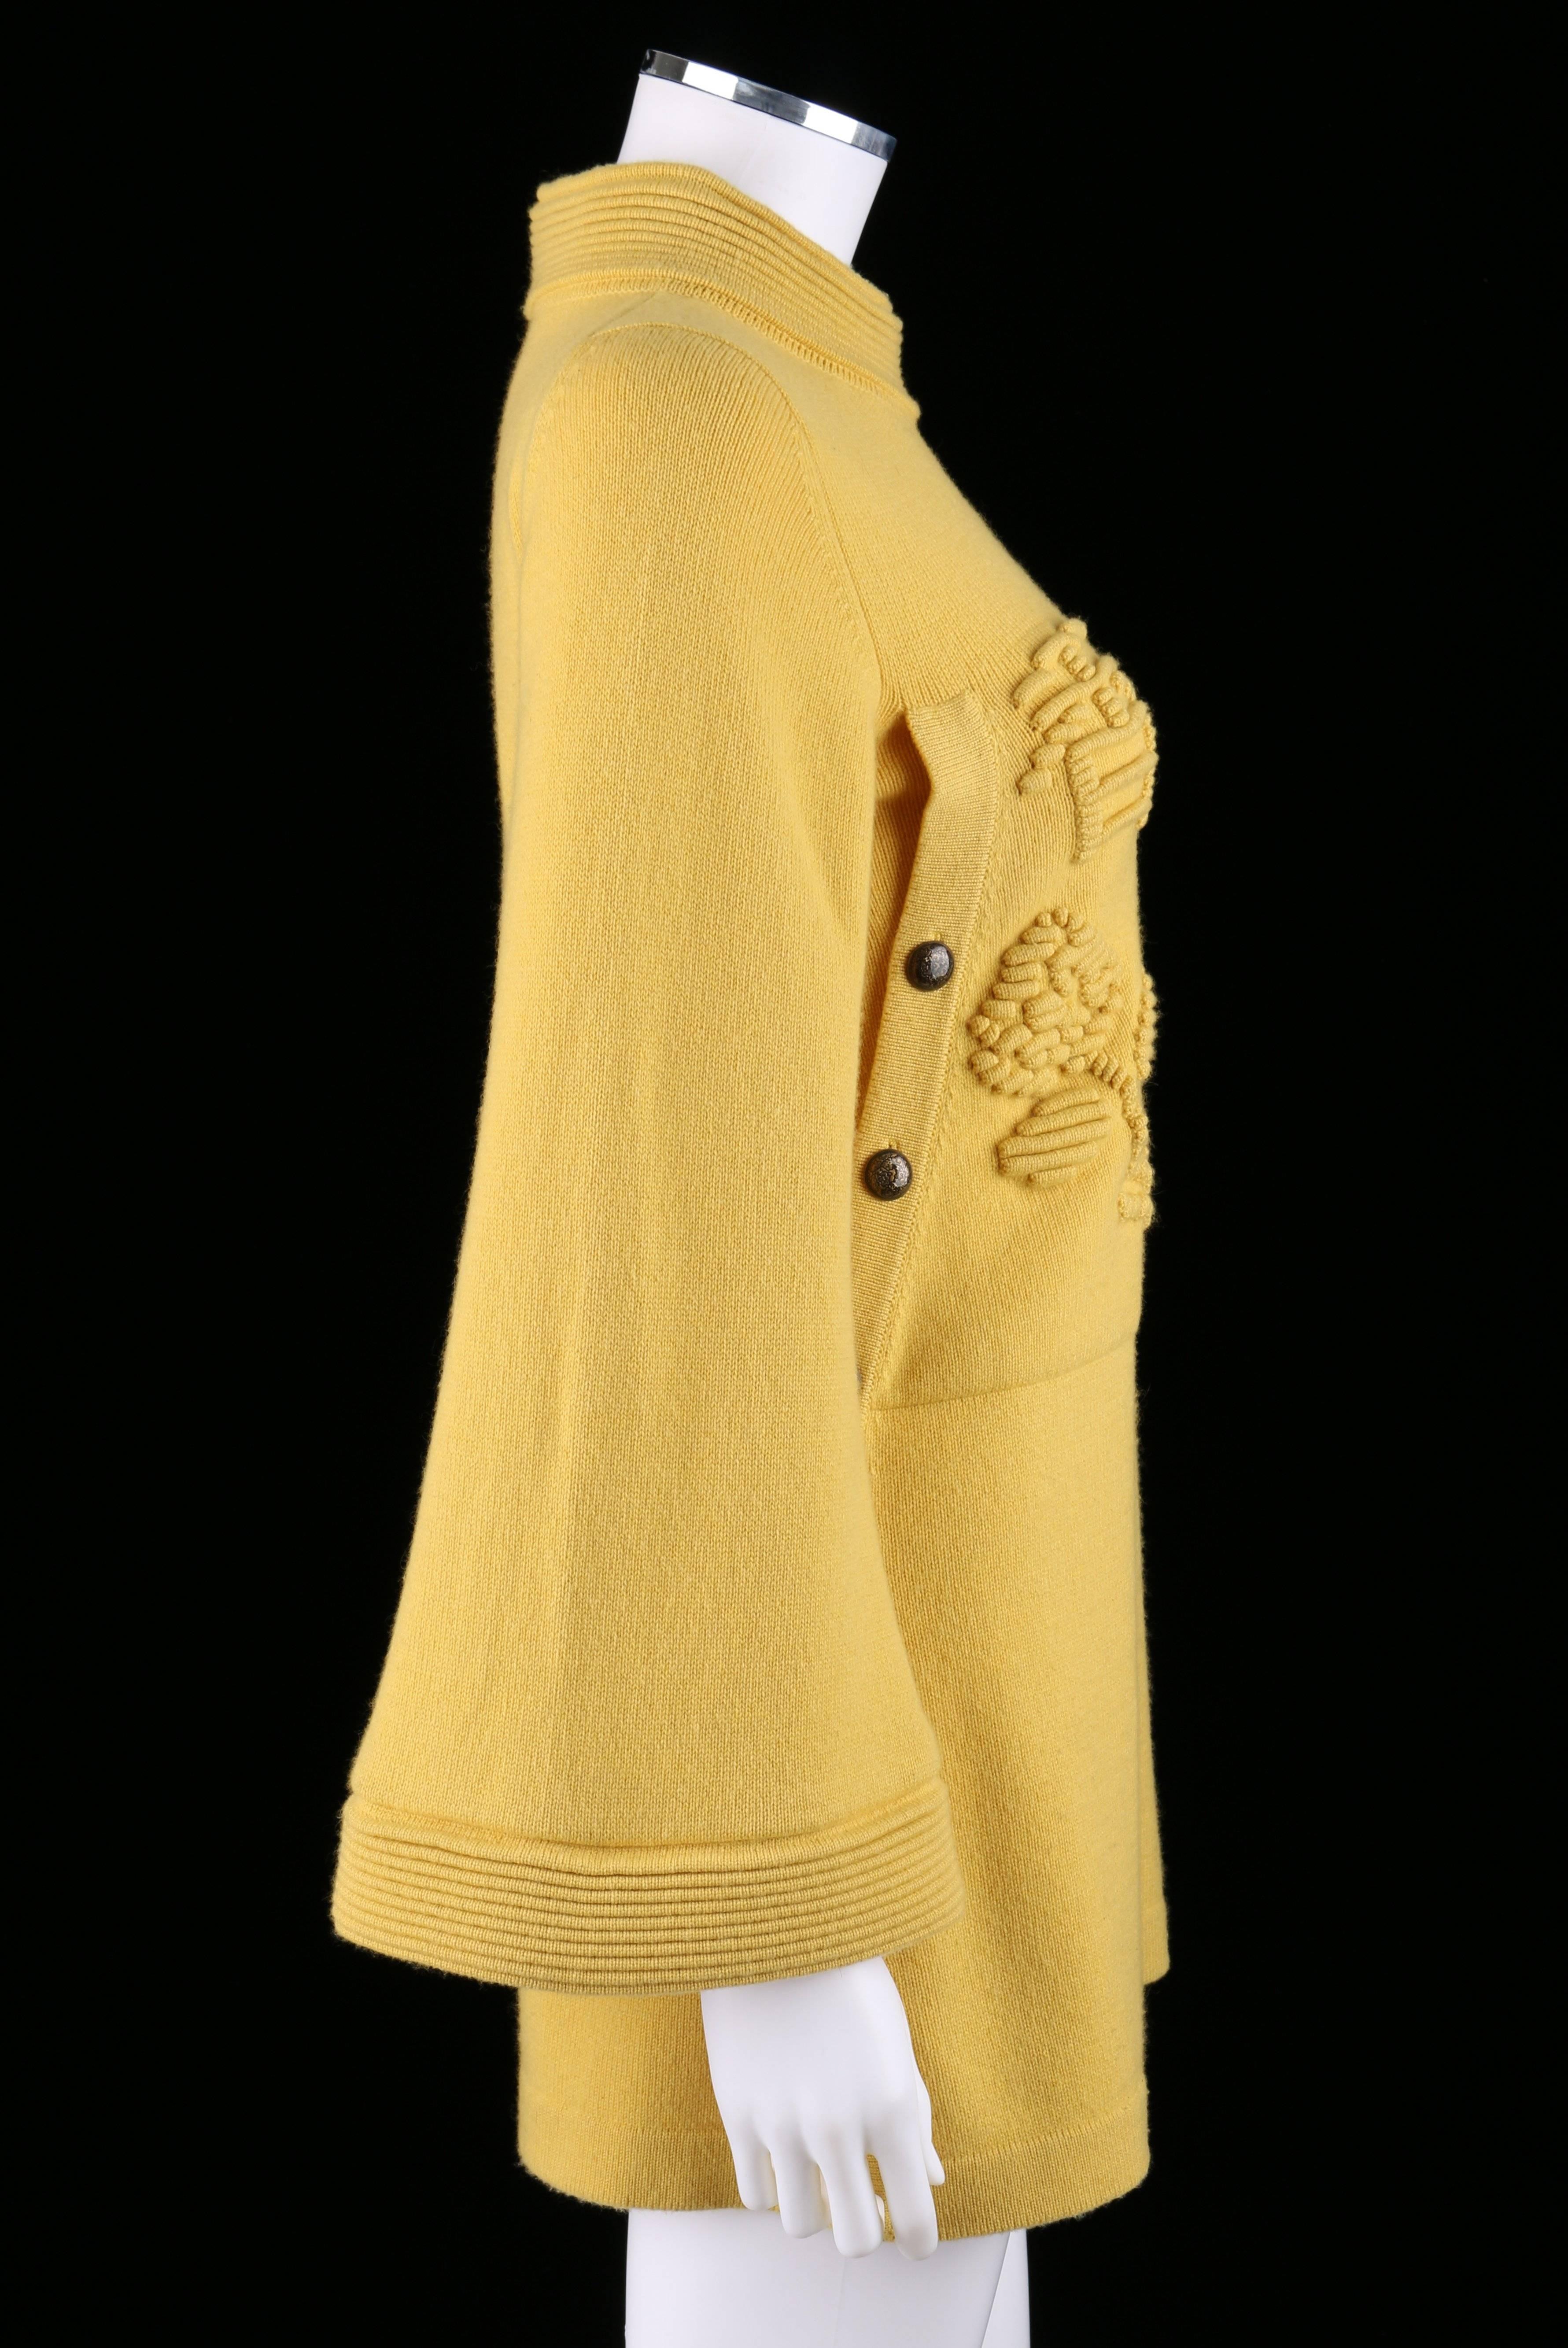 Chanel goldenrod yellow cashmere tunic sweater / mini tunic dress from the Pre-Fall 2010 